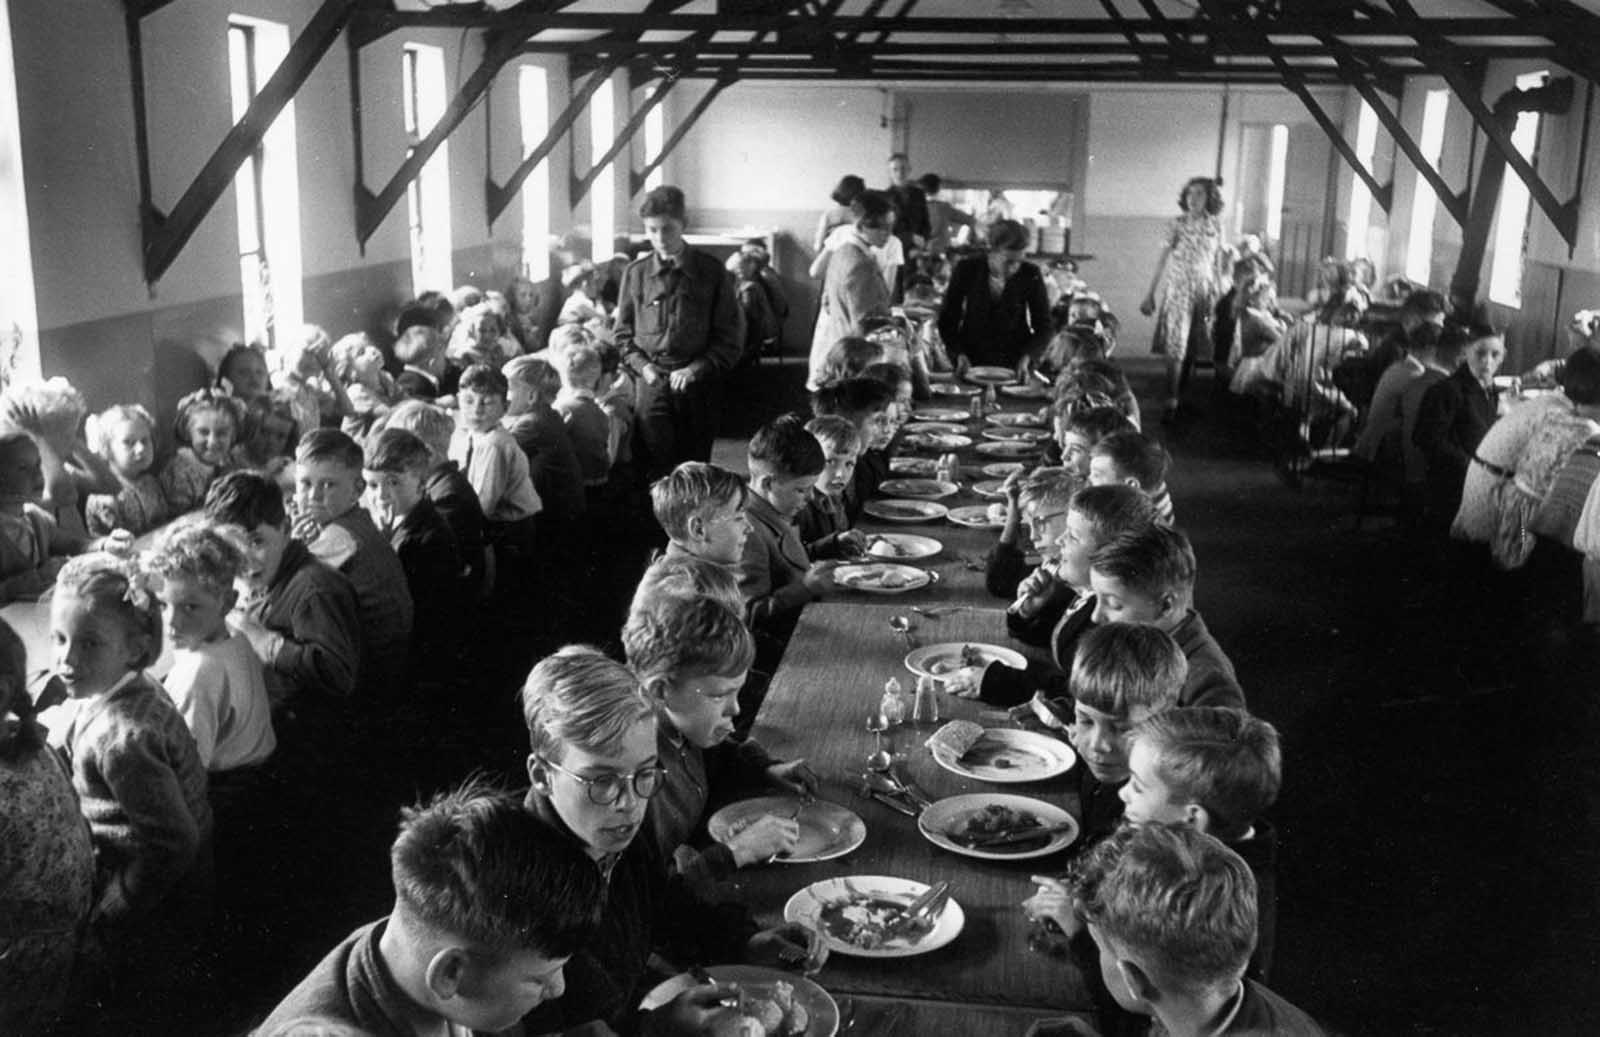 An overcrowded dining hall at Walsgrave Colliery School near Coventry, England filled by children of the post war baby boom, 1952.